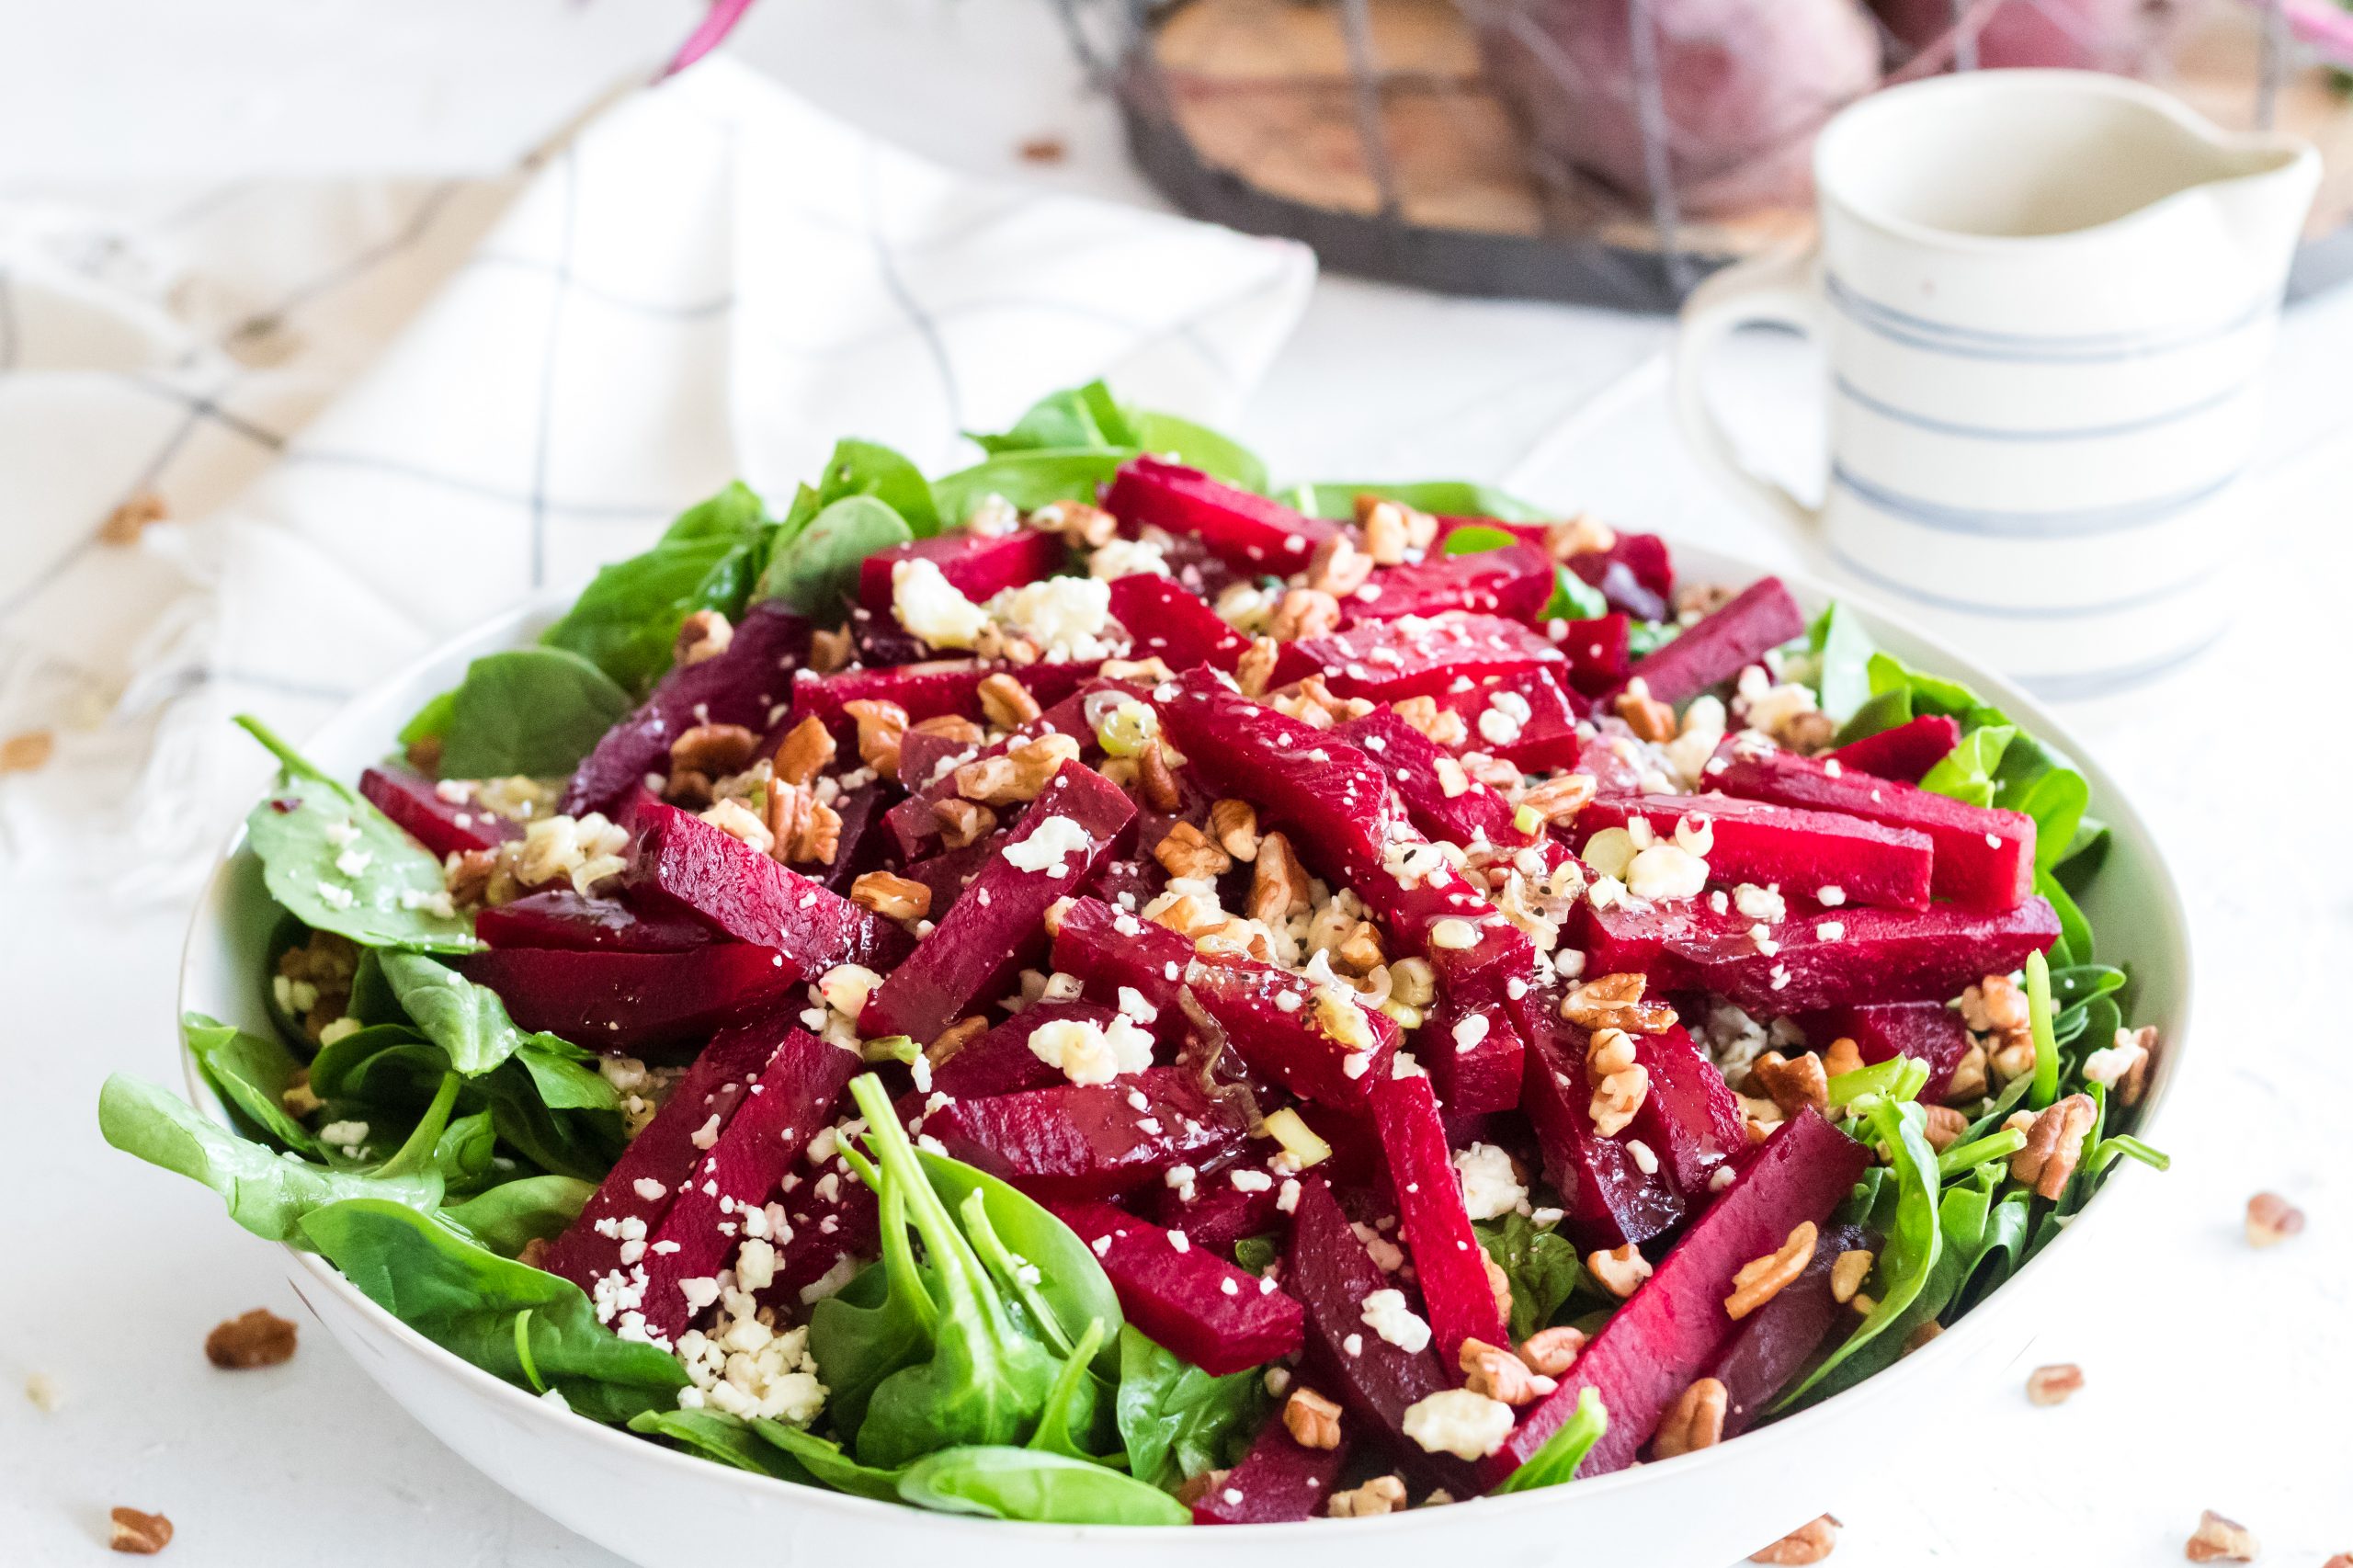 Fresh beets with crumbled blue cheese and pecans on a bed of greens in your favorite bowl